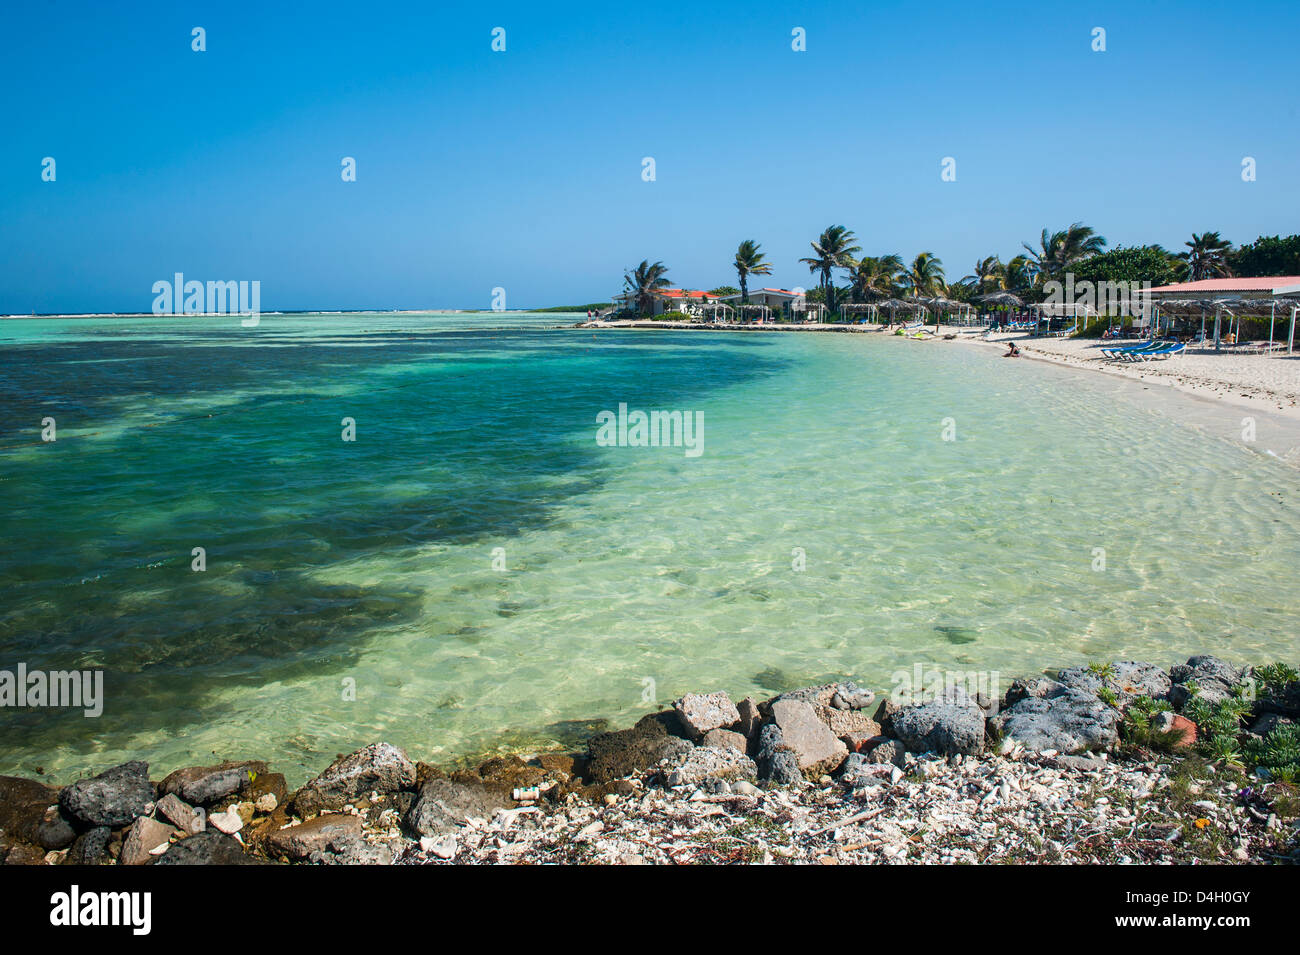 Turquoise water Lac Bay, Bonaire, ABC Islands, Netherlands Antilles, Caribbean Stock Photo